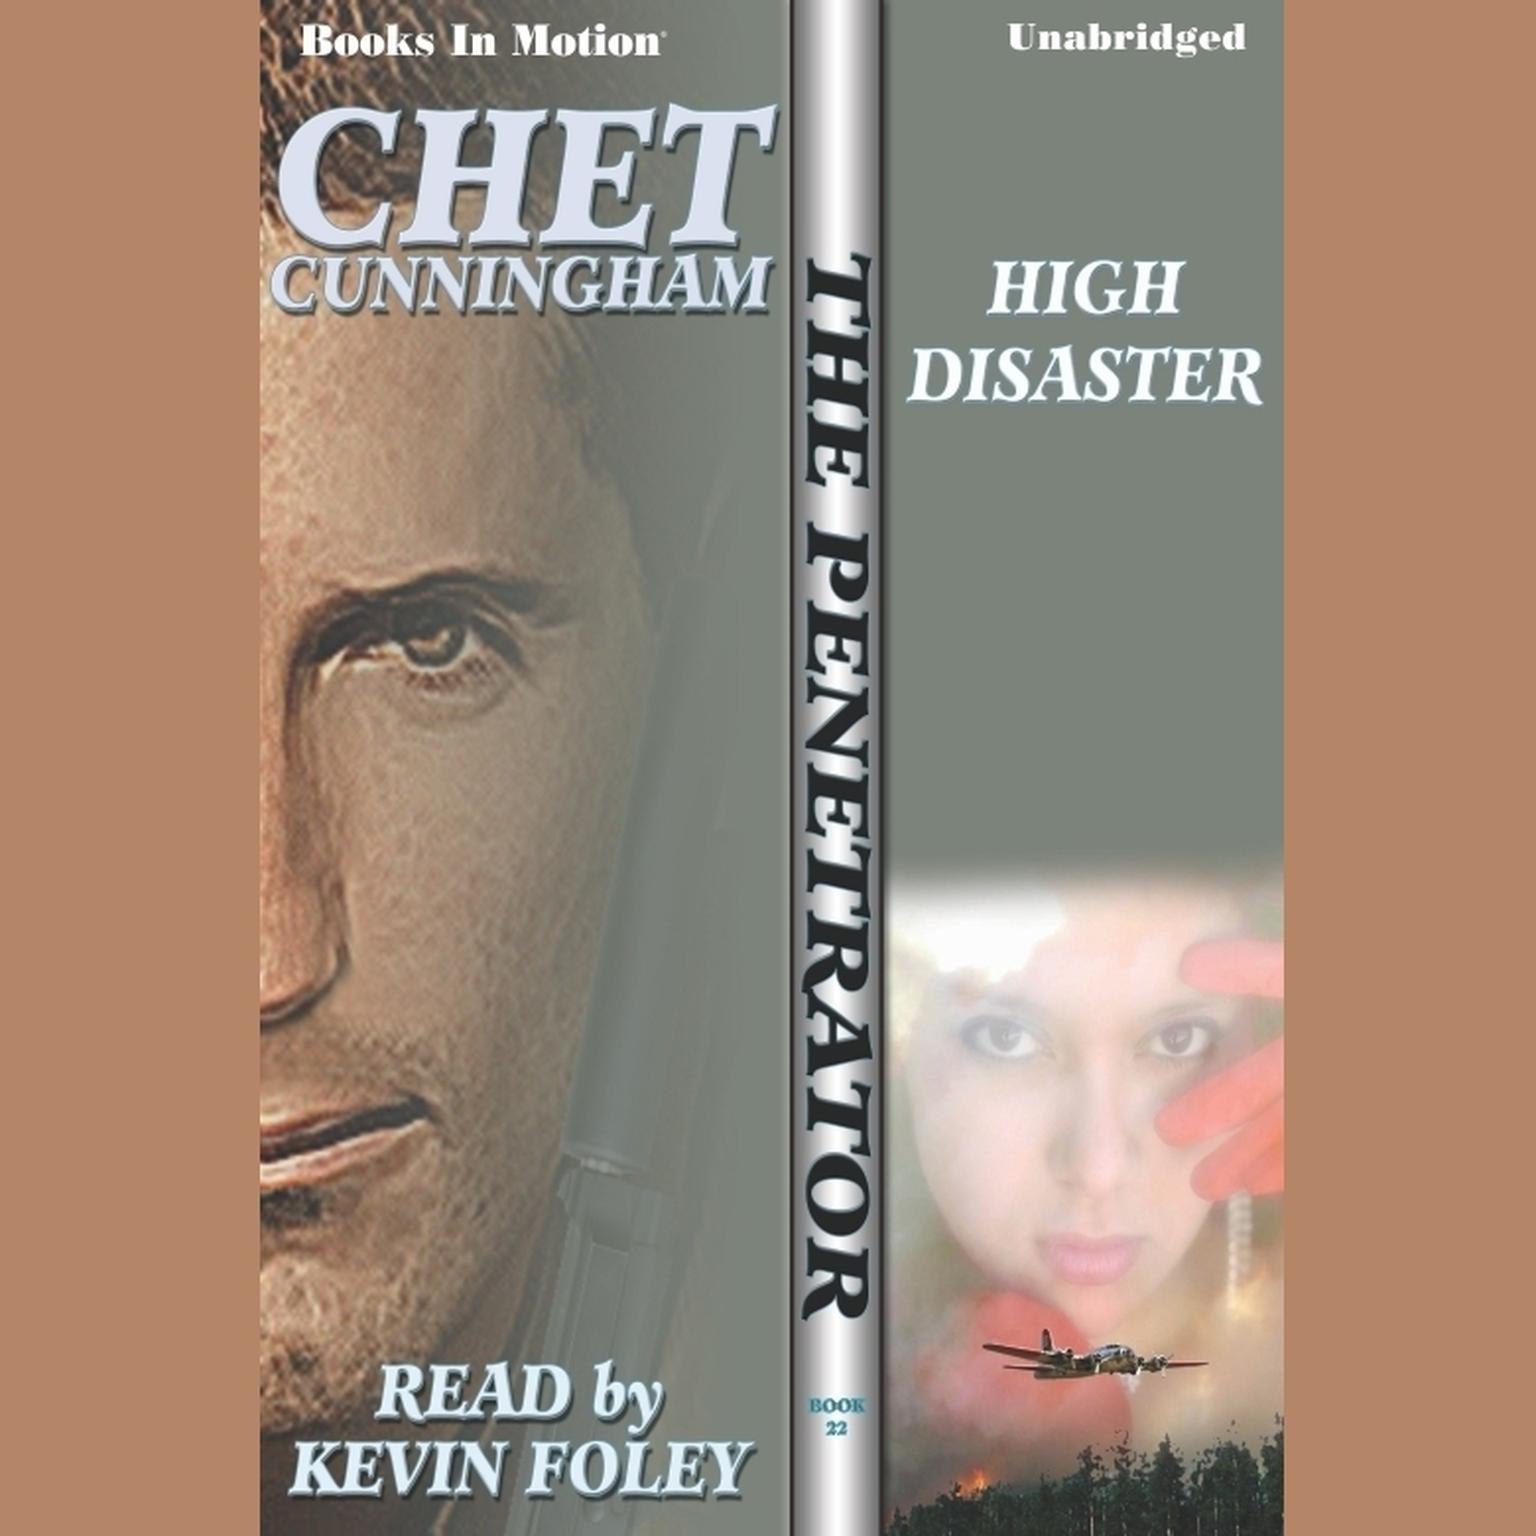 High Disaster Audiobook, by Chet Cunningham